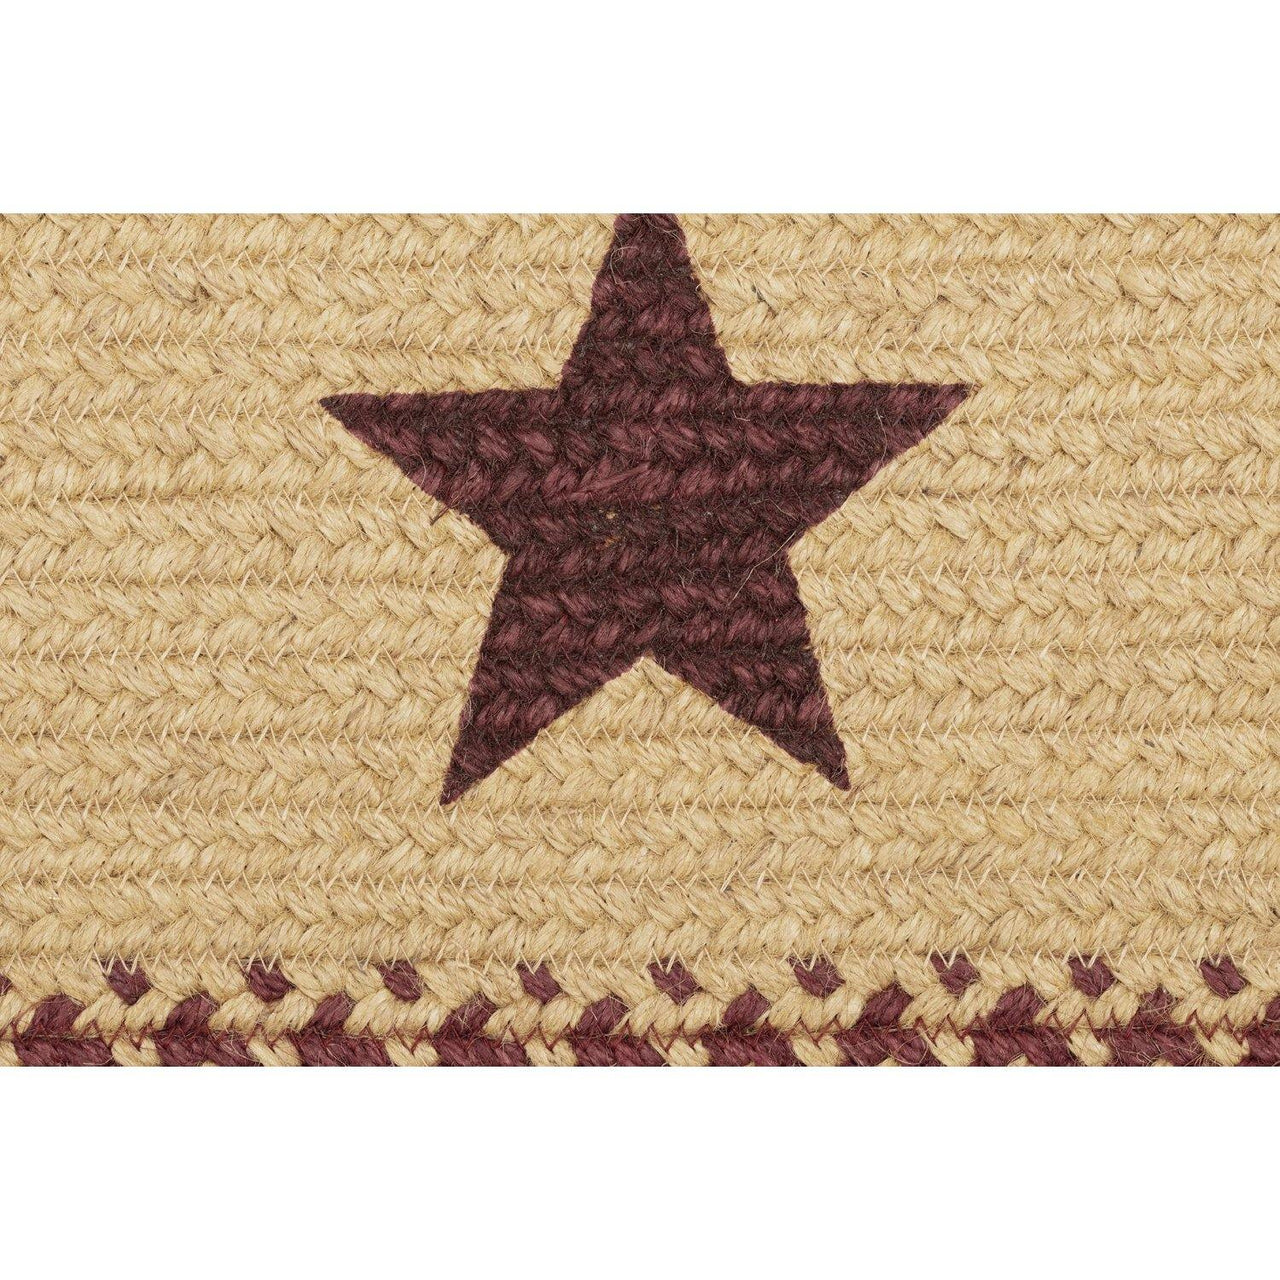 Burgundy Red Primitive Jute Braided Rug Rect Stencil Stars 5'x8' with Rug Pad VHC Brands - The Fox Decor